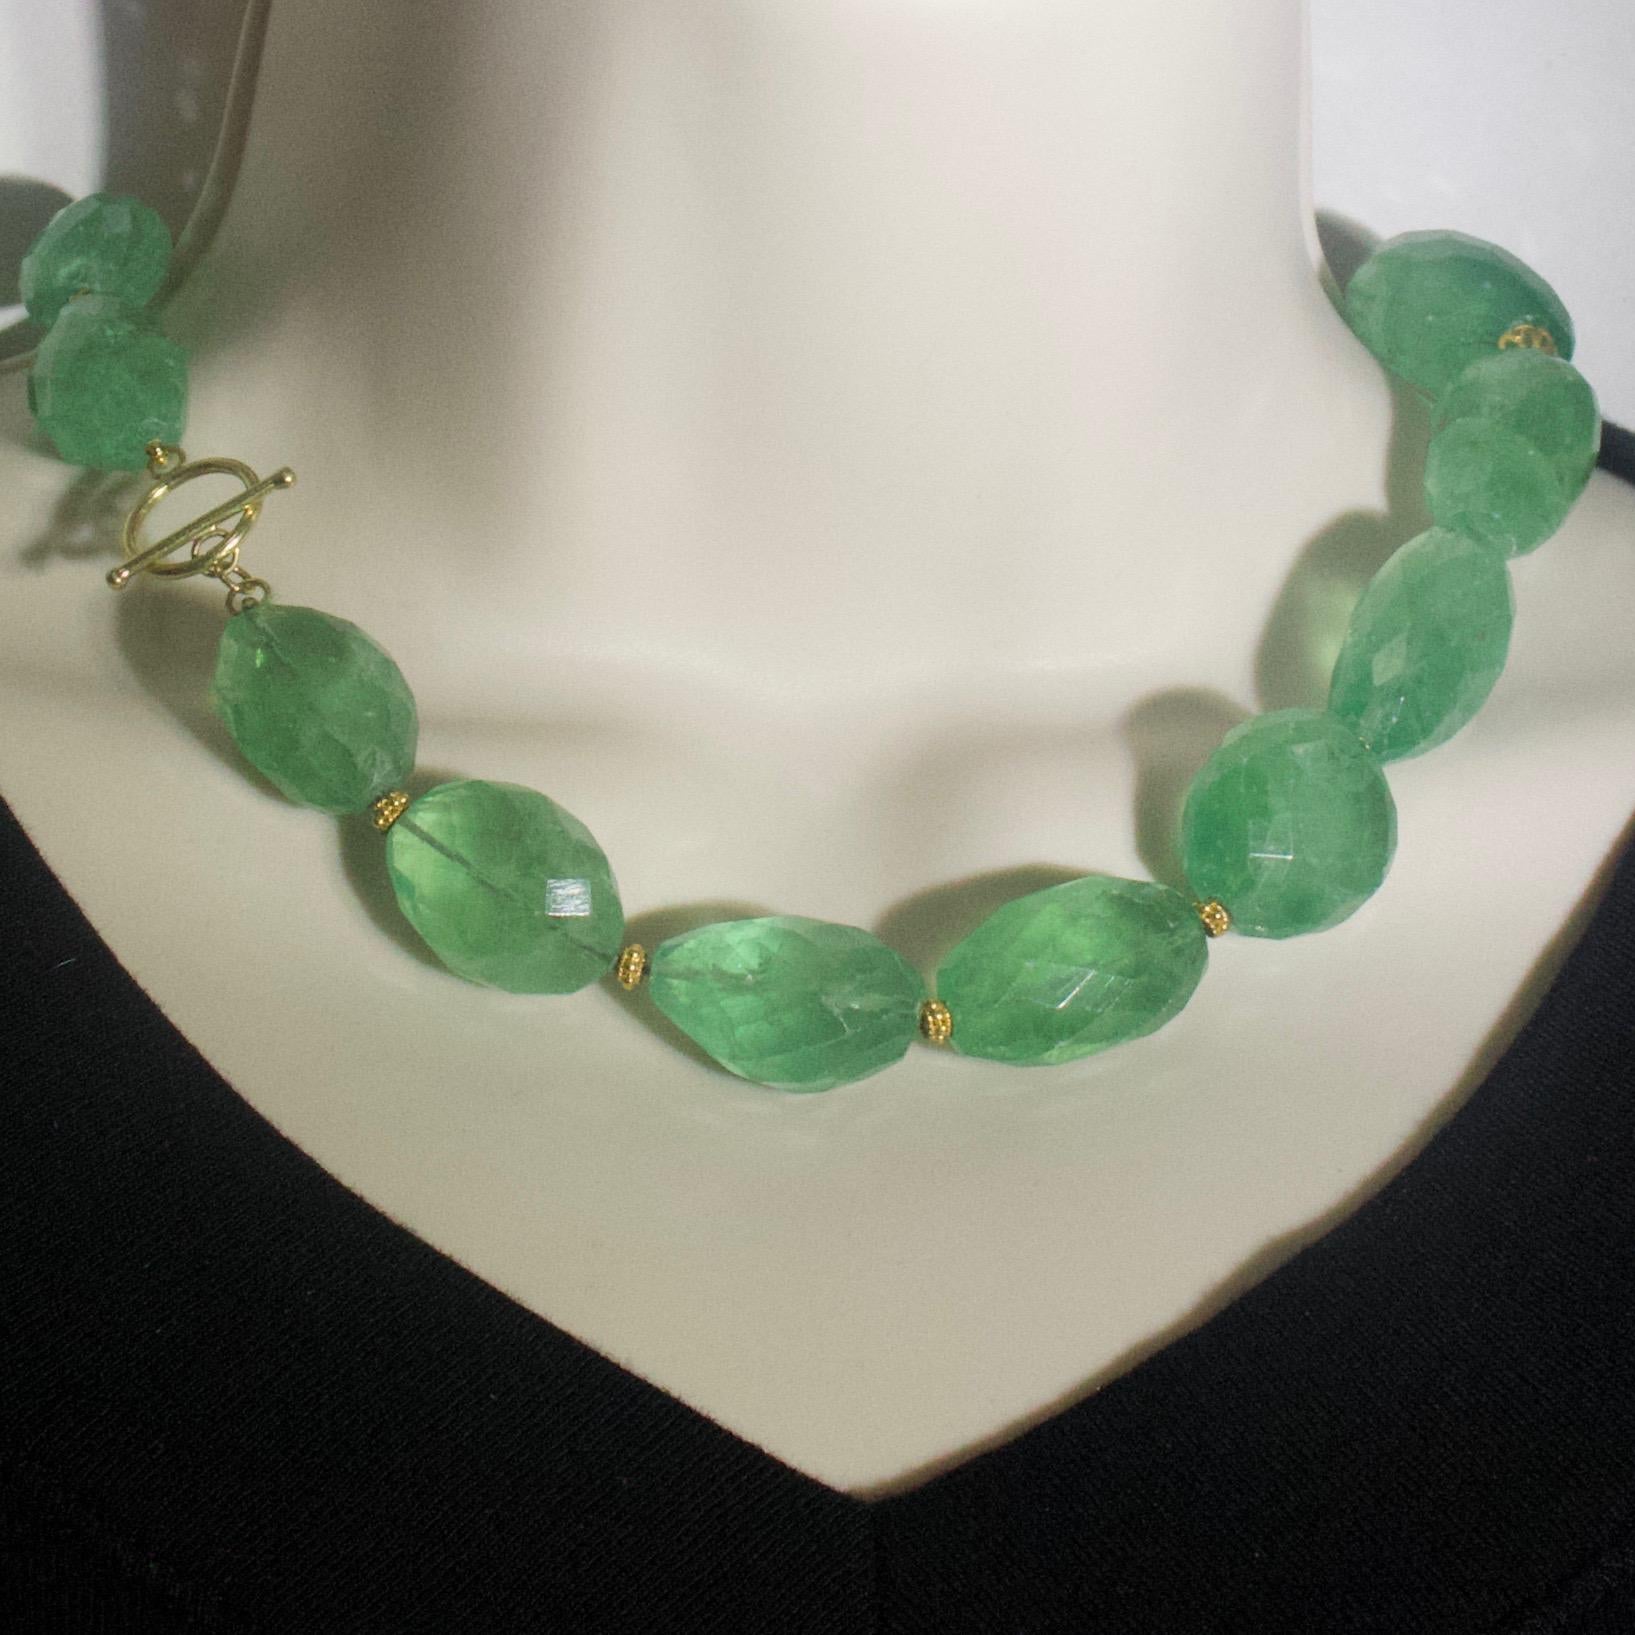 Green Flourite Faceted Necklace with 18 Karat Gold Clasp and Rondelles im Zustand „Neu“ im Angebot in New York, NY